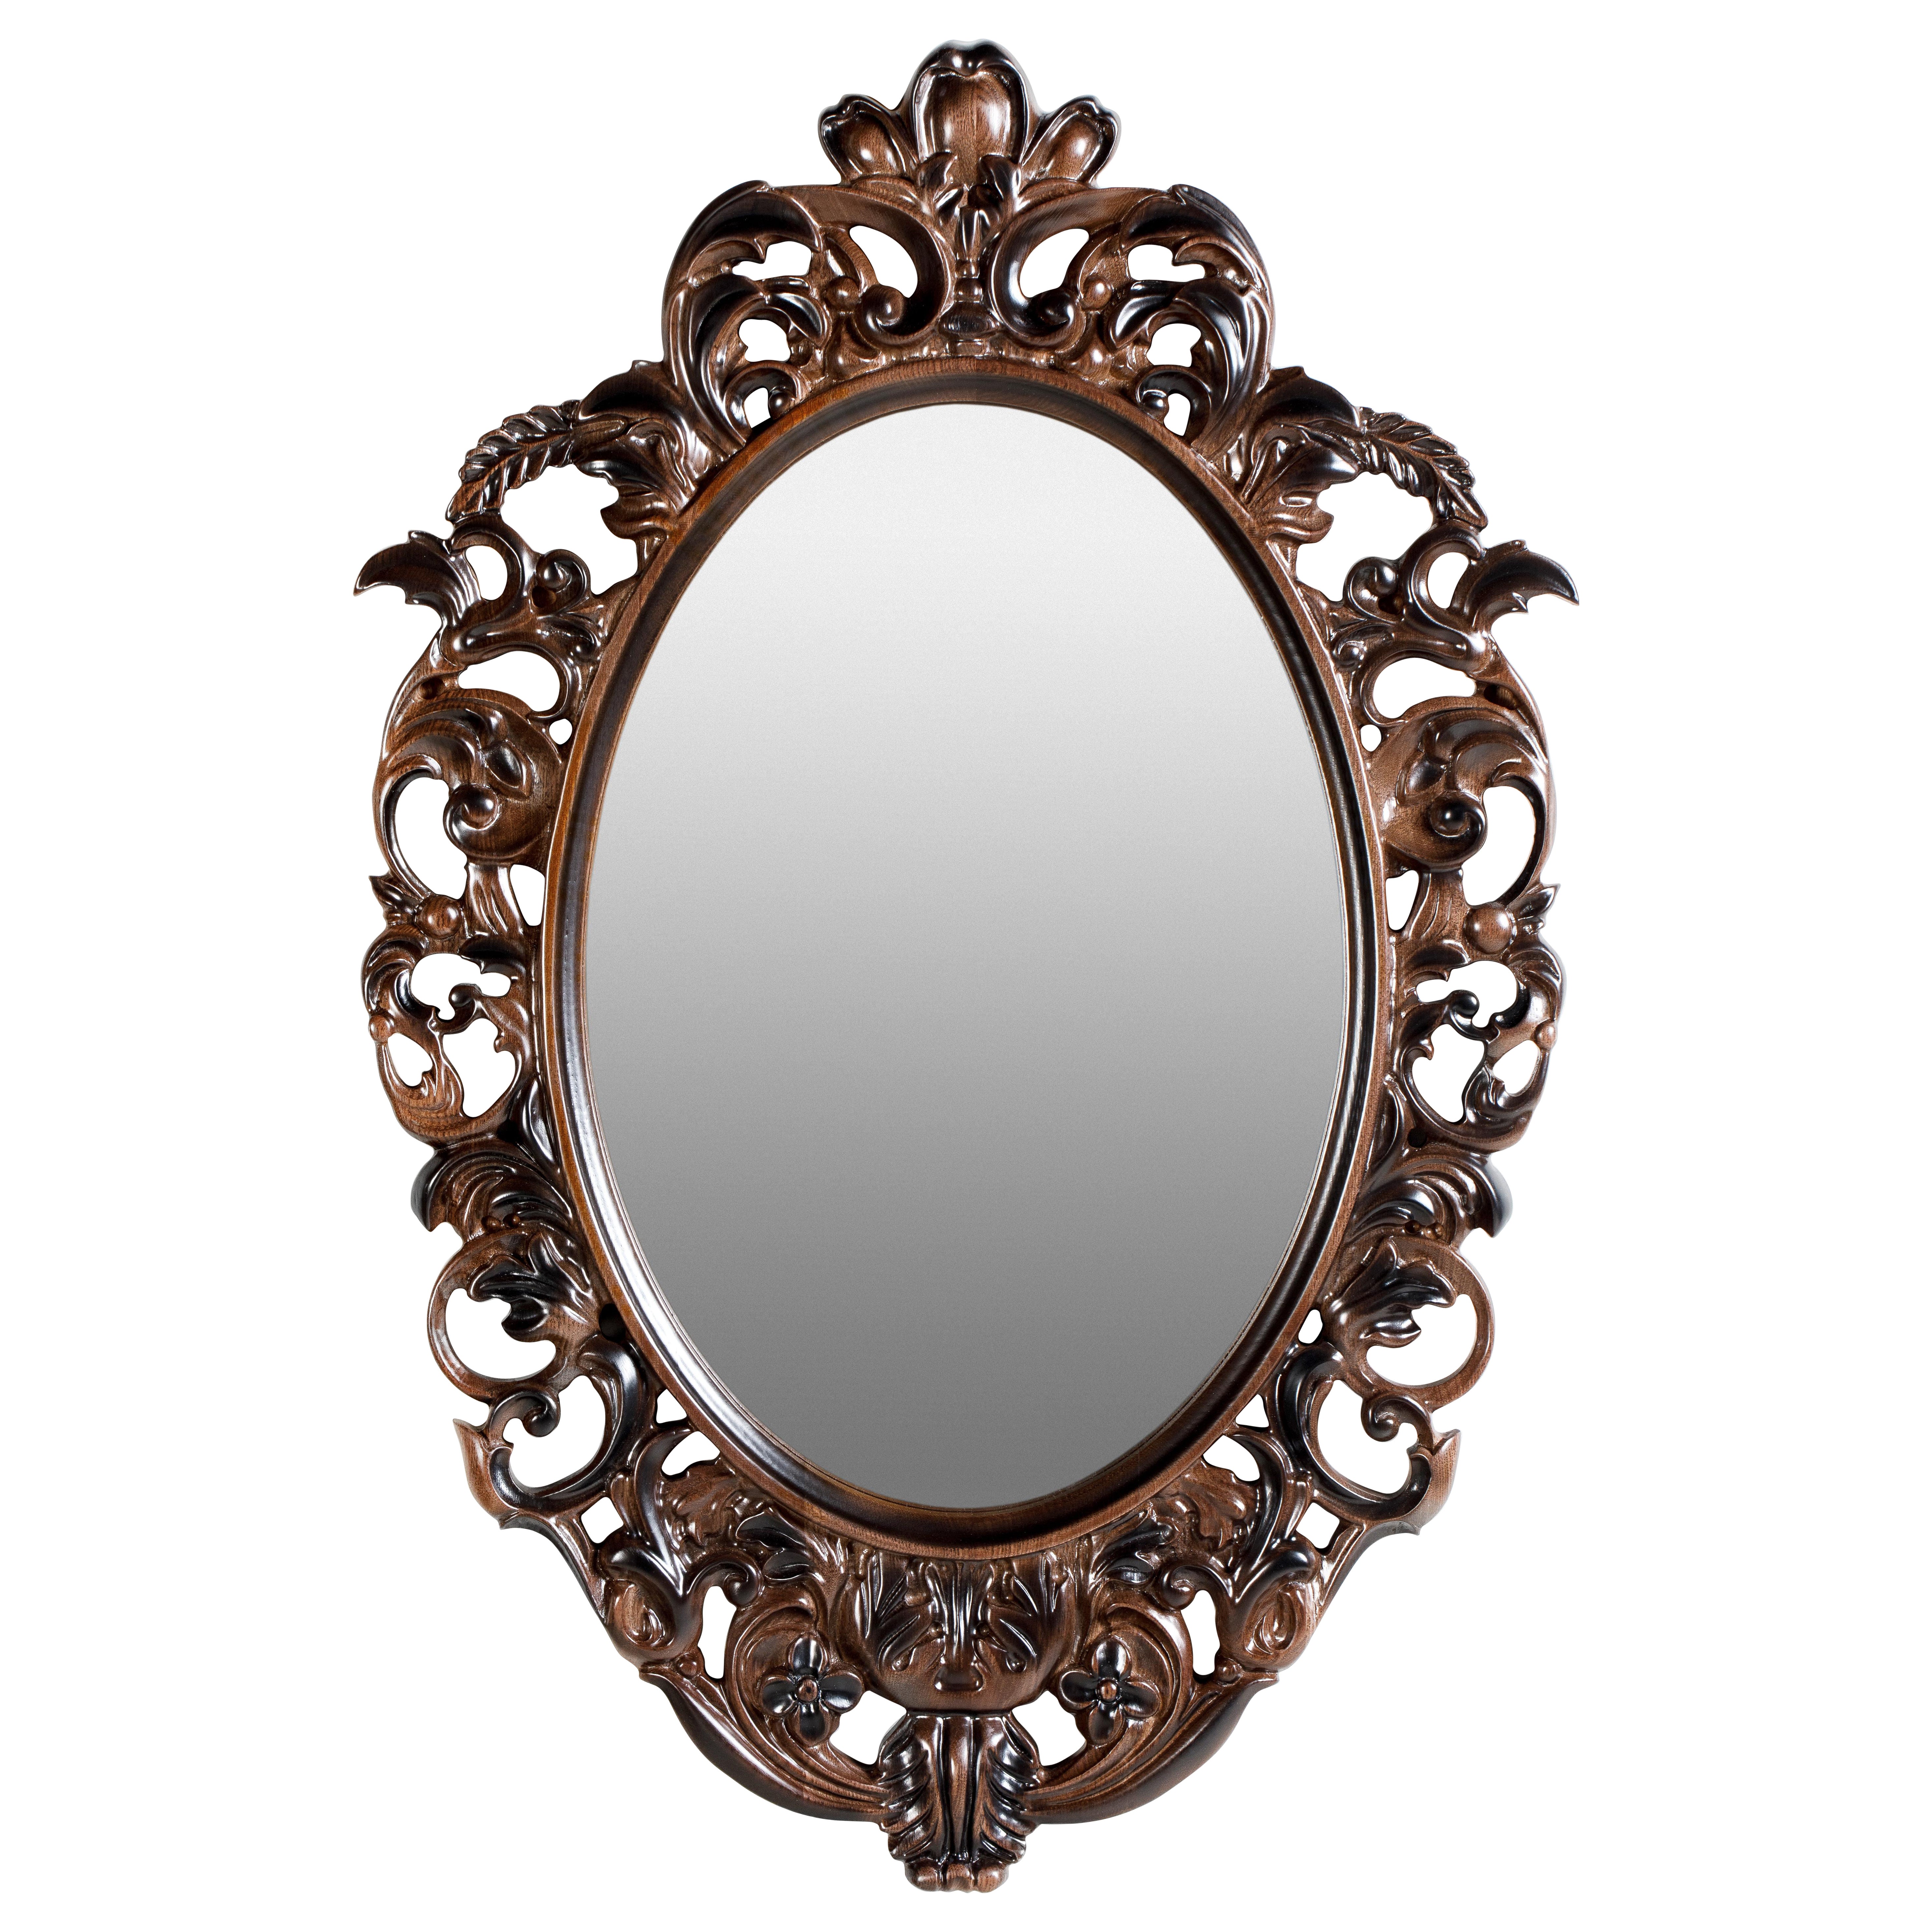 Dark Antique Style Oval Ash Solid Wood Mirror For Sale